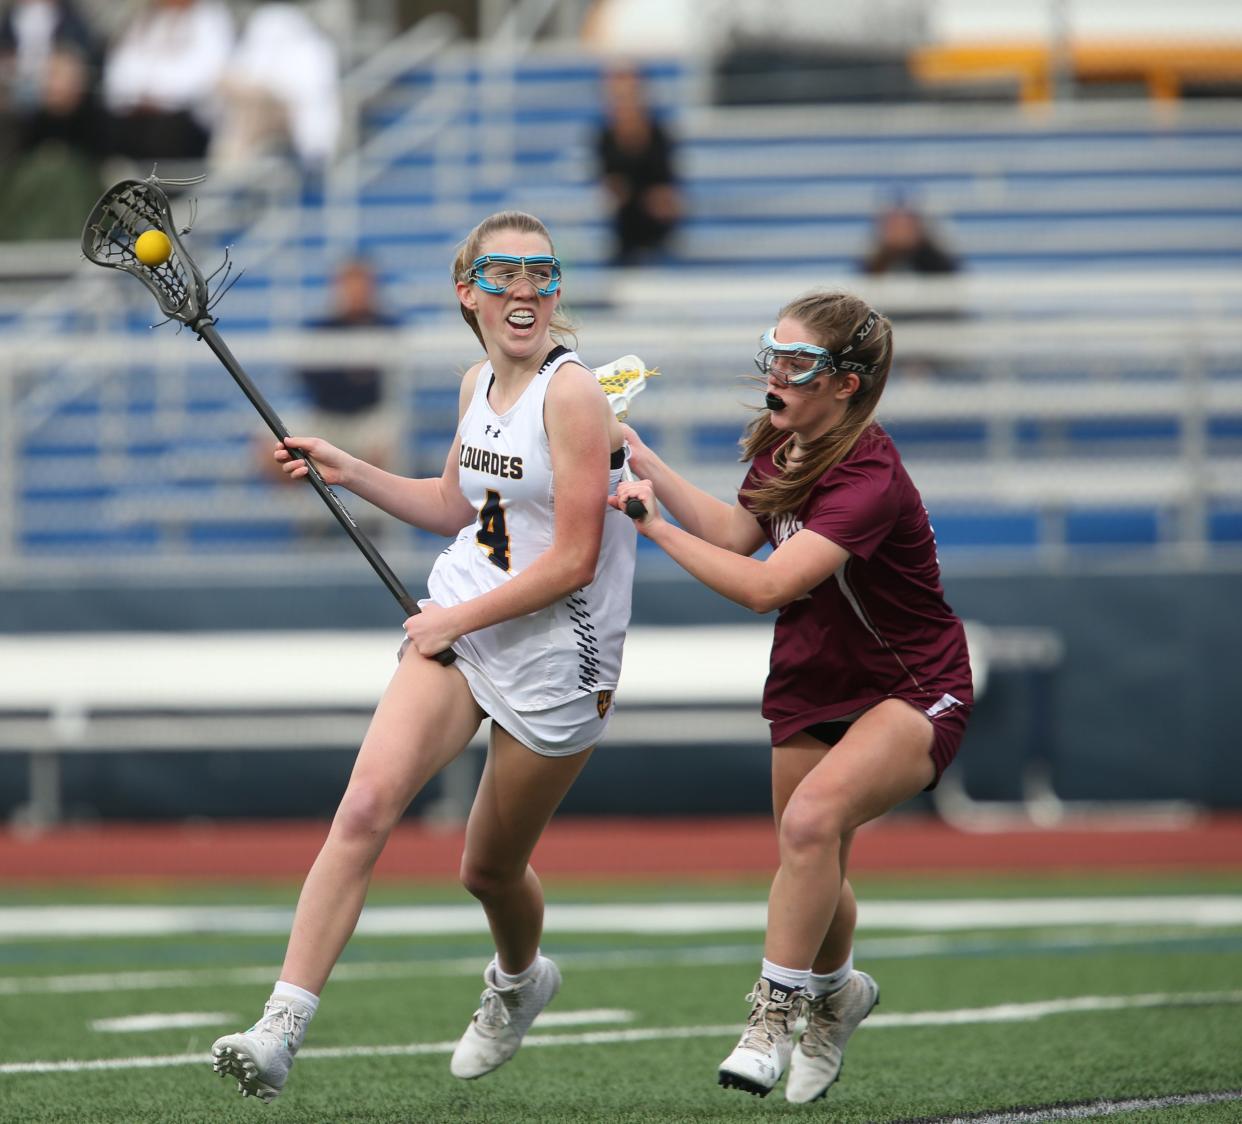 Lourdes' Deirdre Connolly moves the ball up field against Arlington during a May 3, 2022 girls lacrosse game.